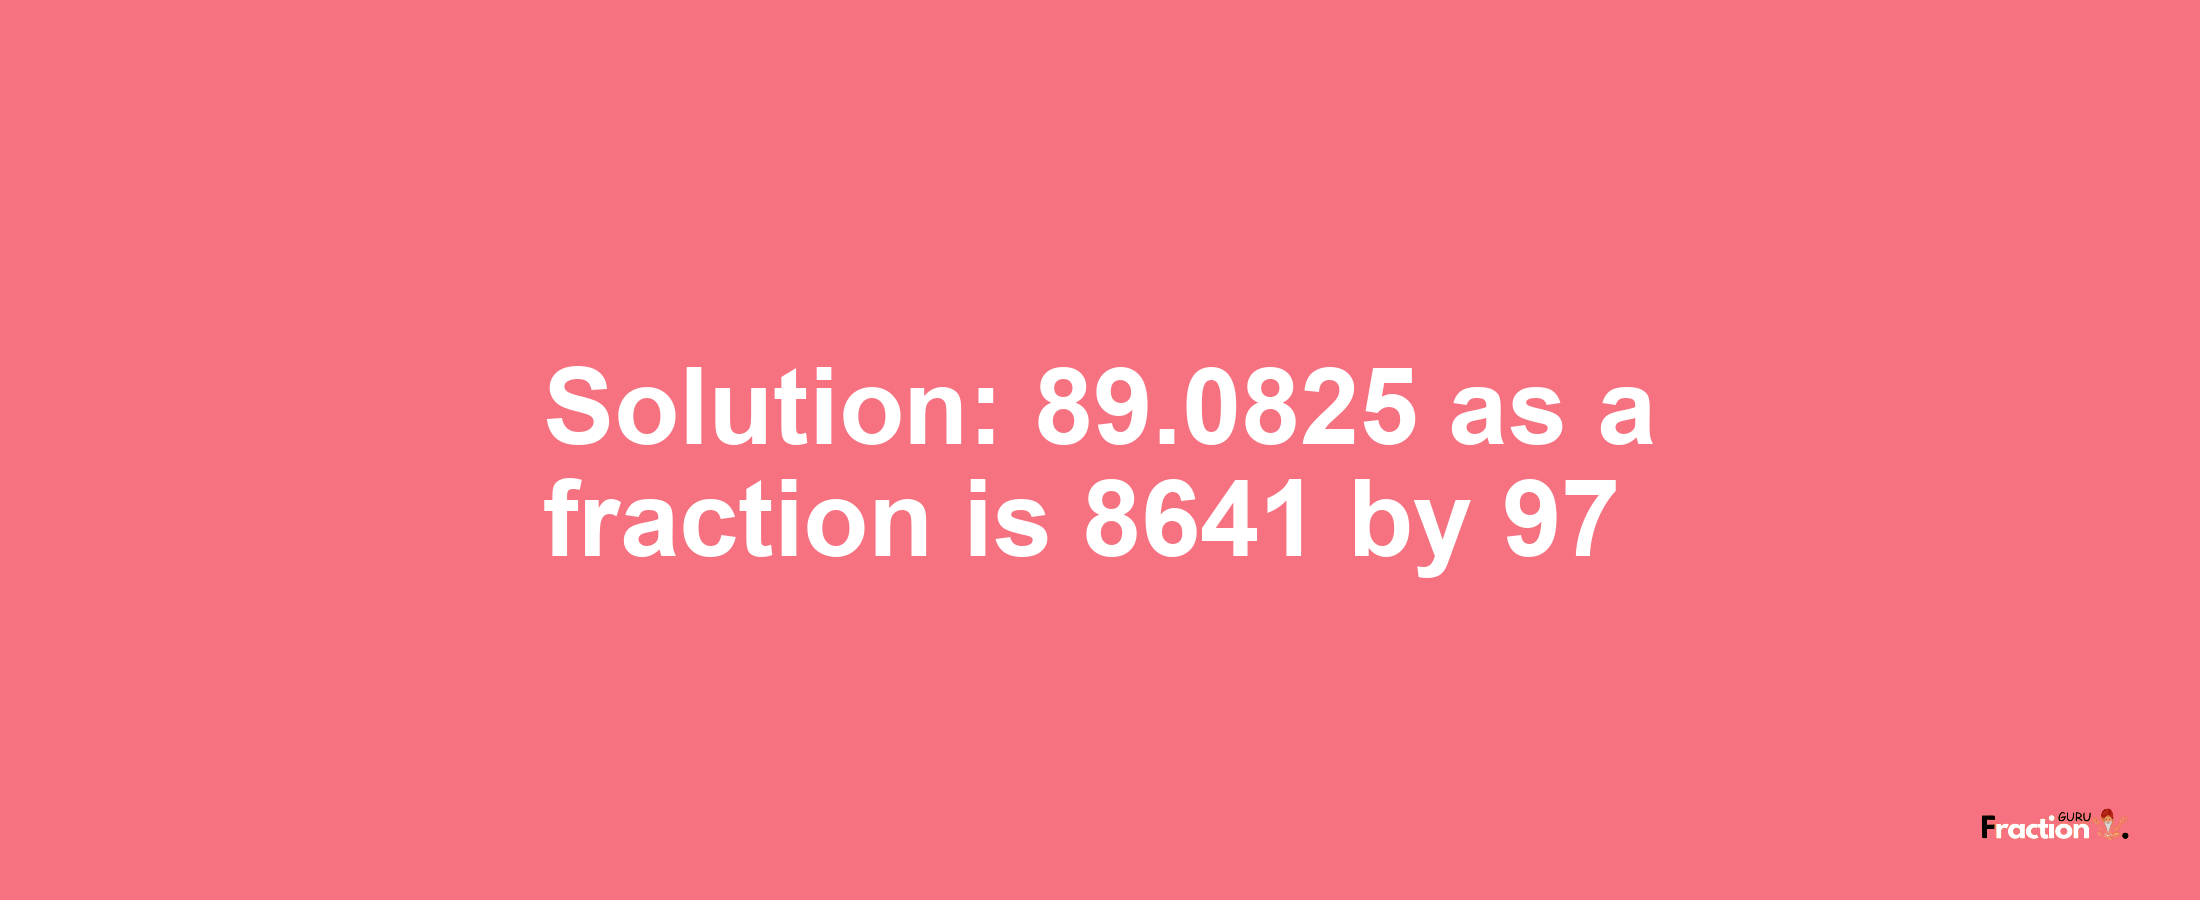 Solution:89.0825 as a fraction is 8641/97